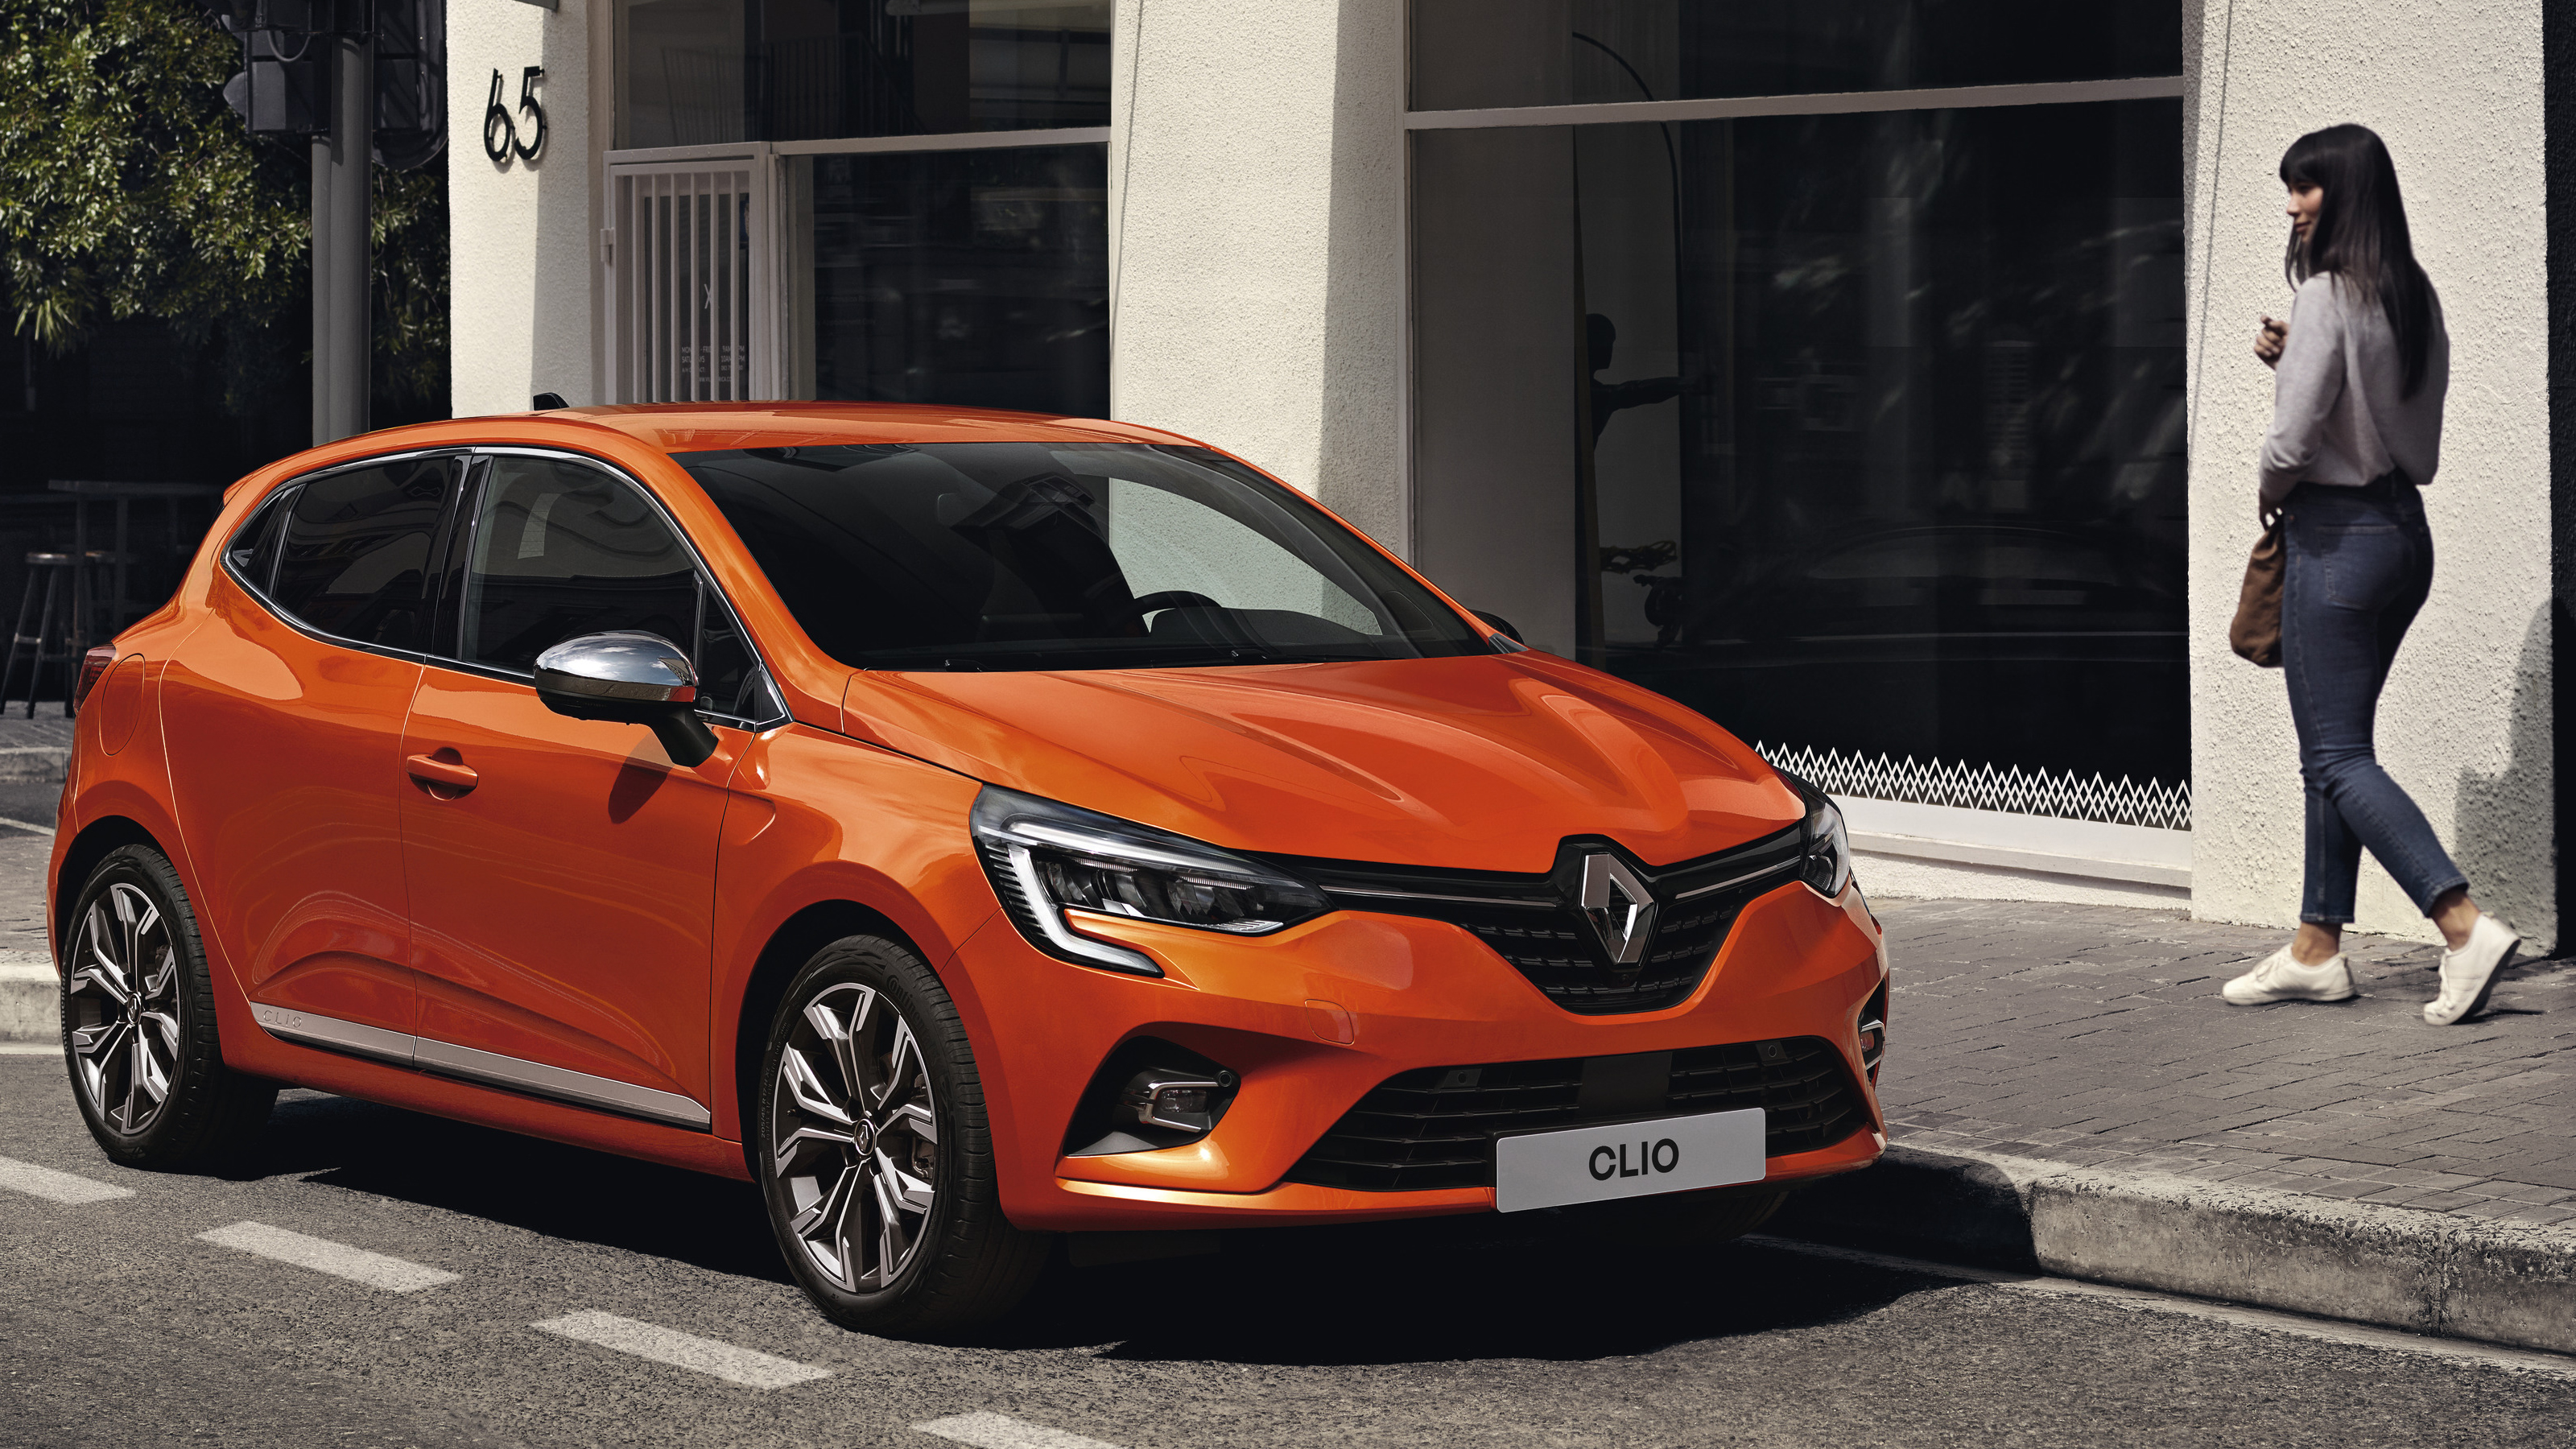 hybrid engine for Clio leads 2022 Renault updates |